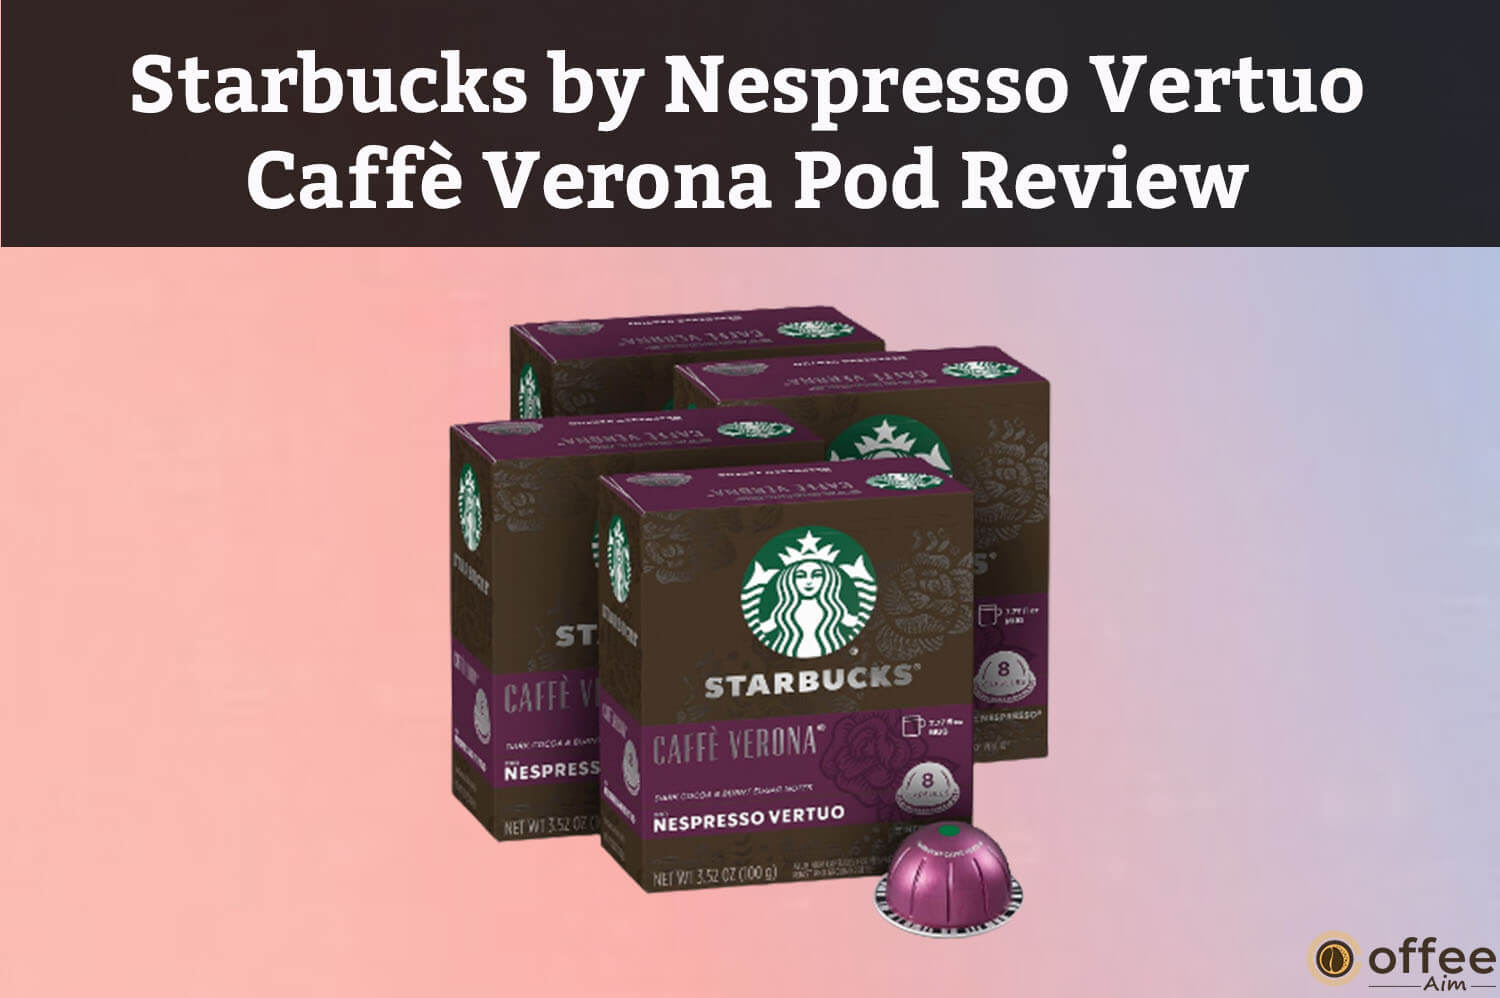 Featured image for the article "Starbucks by Nespresso Vertuo Caffè Verona Pod Review"